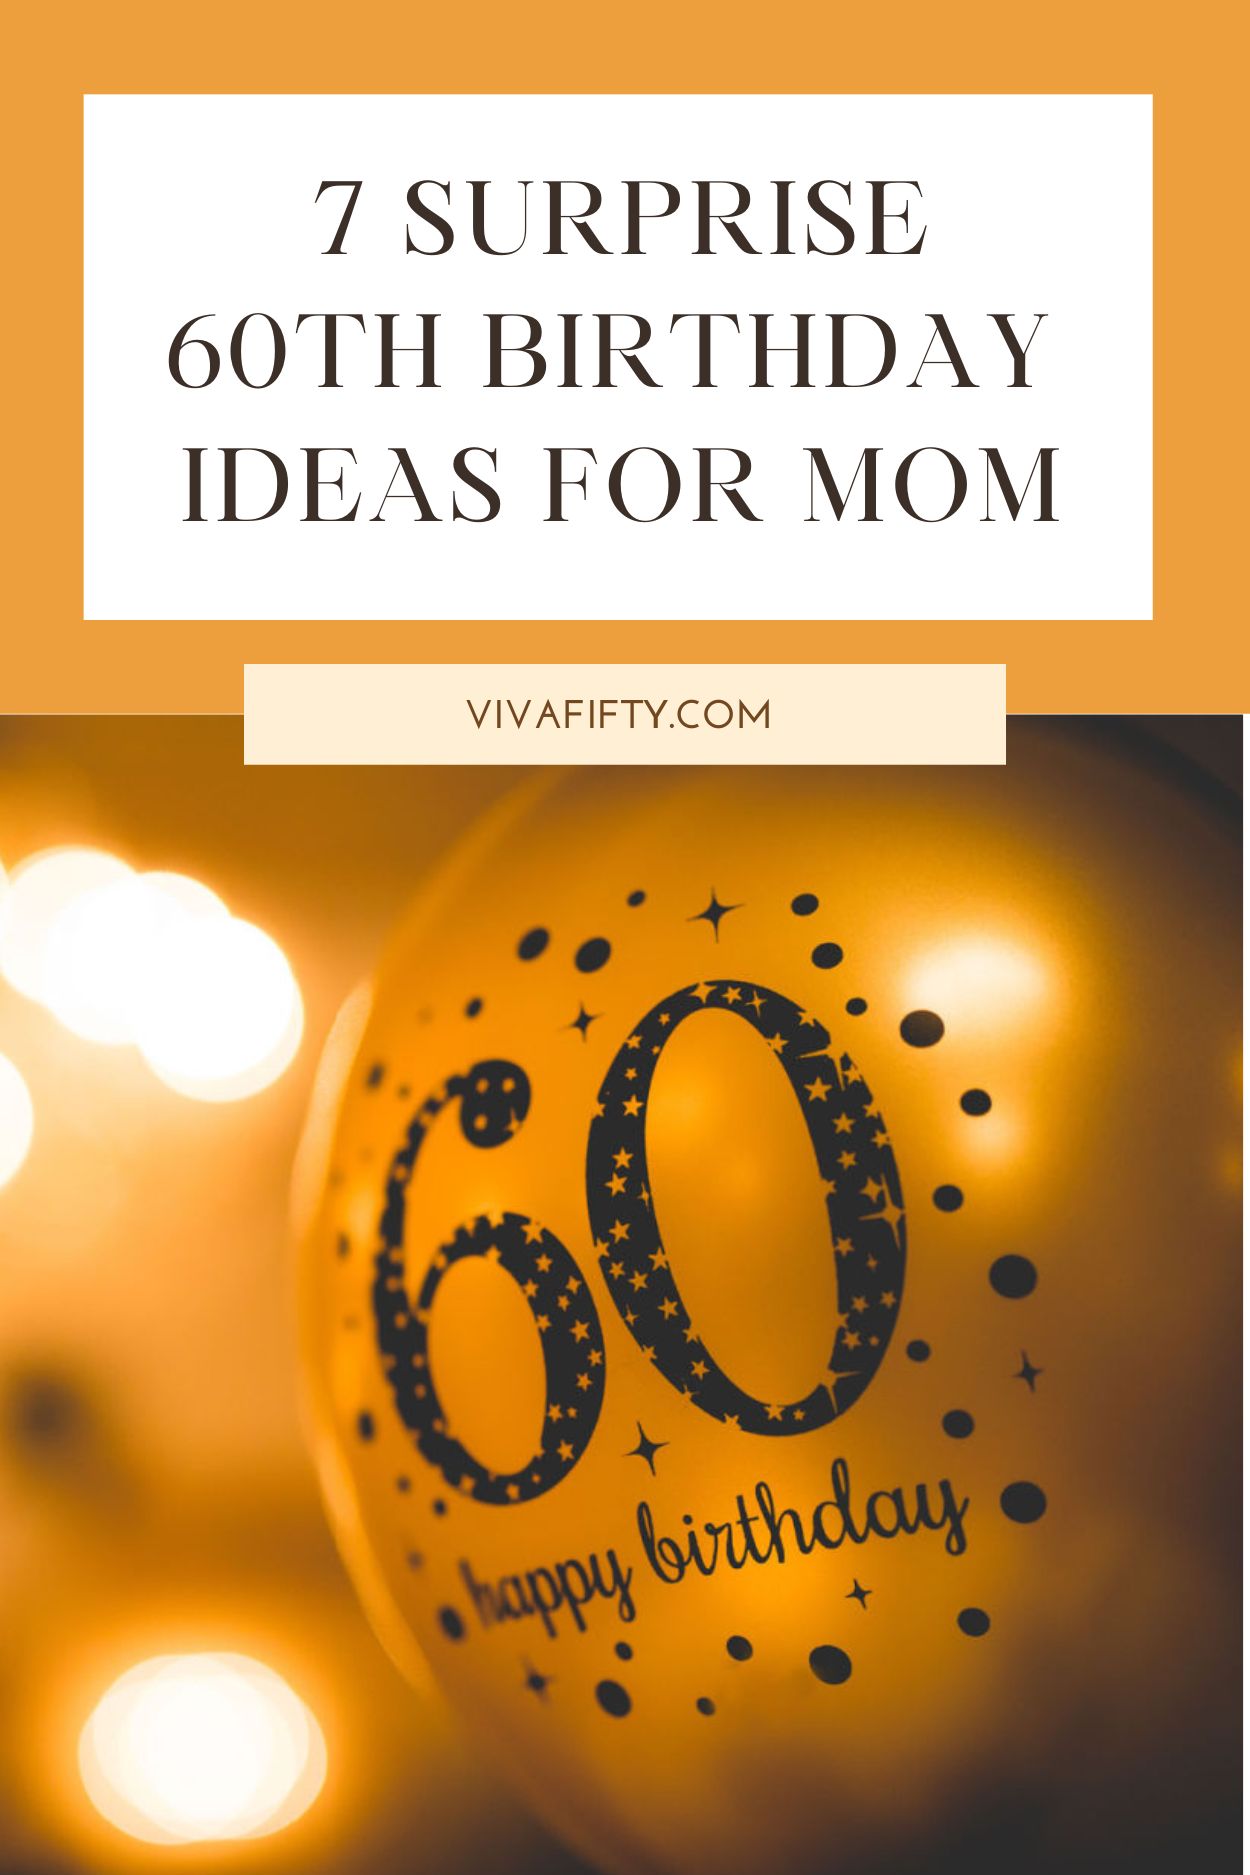 If you want to surprise your mom for her 60th birthday, we have some ideas to help you celebrate with her.